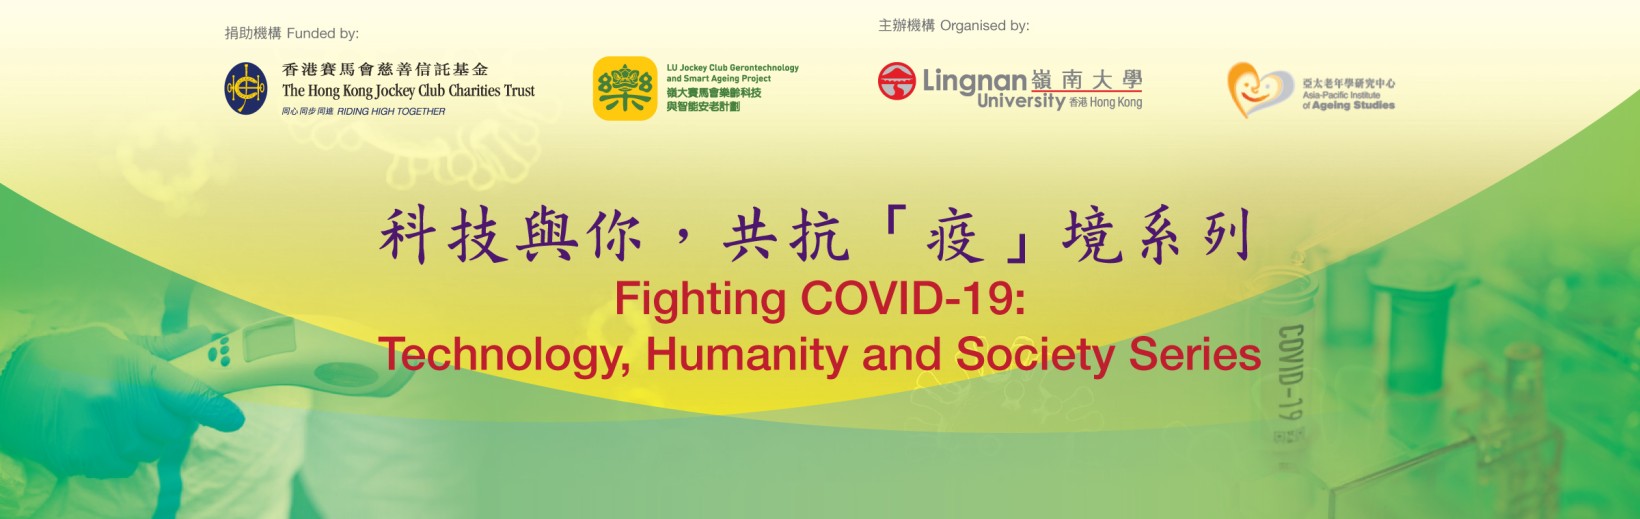 Fighting COVID-19: Technology, Humanity and Society Series